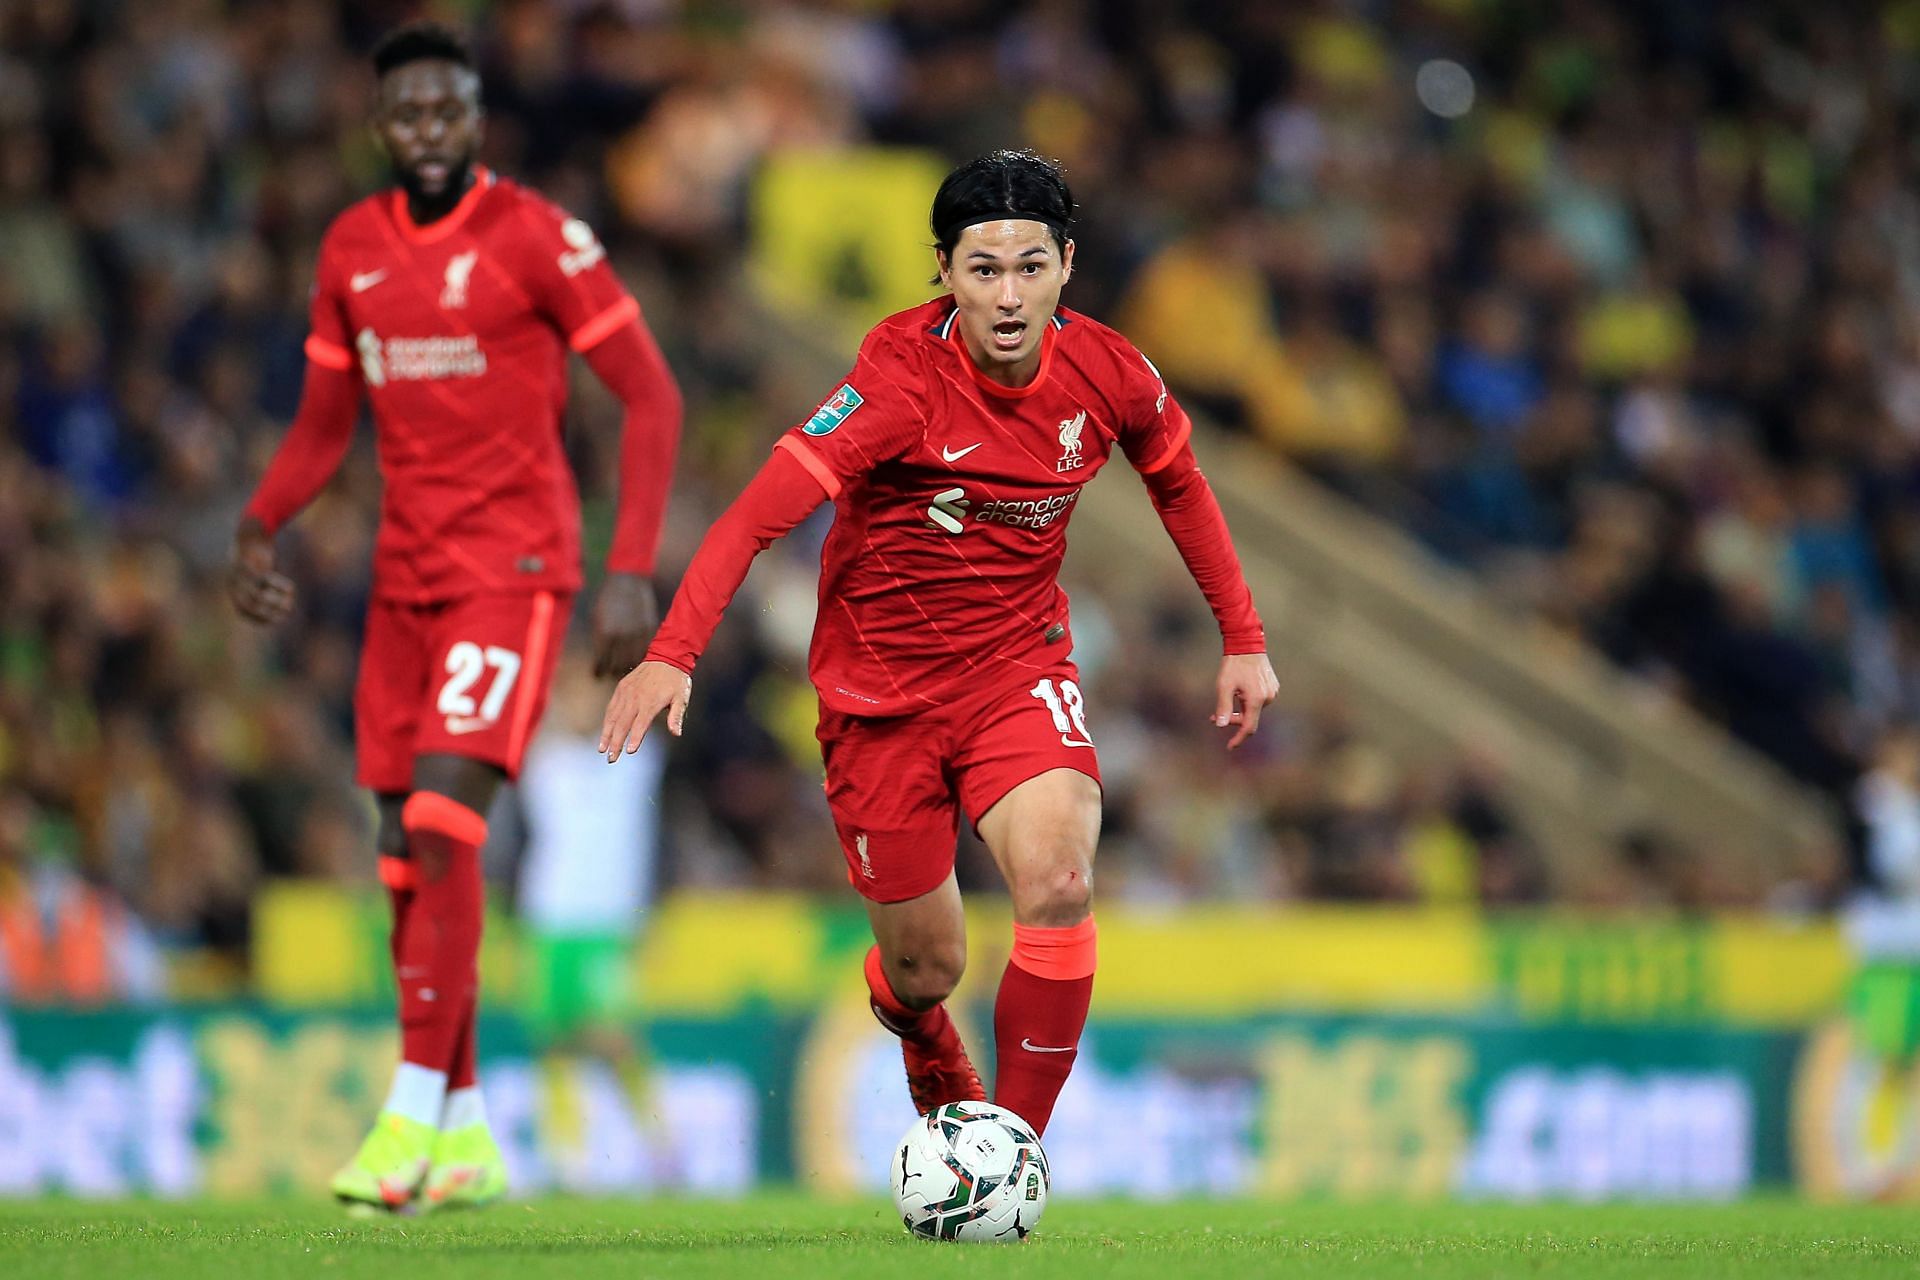 Norwich City v Liverpool - Carabao Cup Third Round